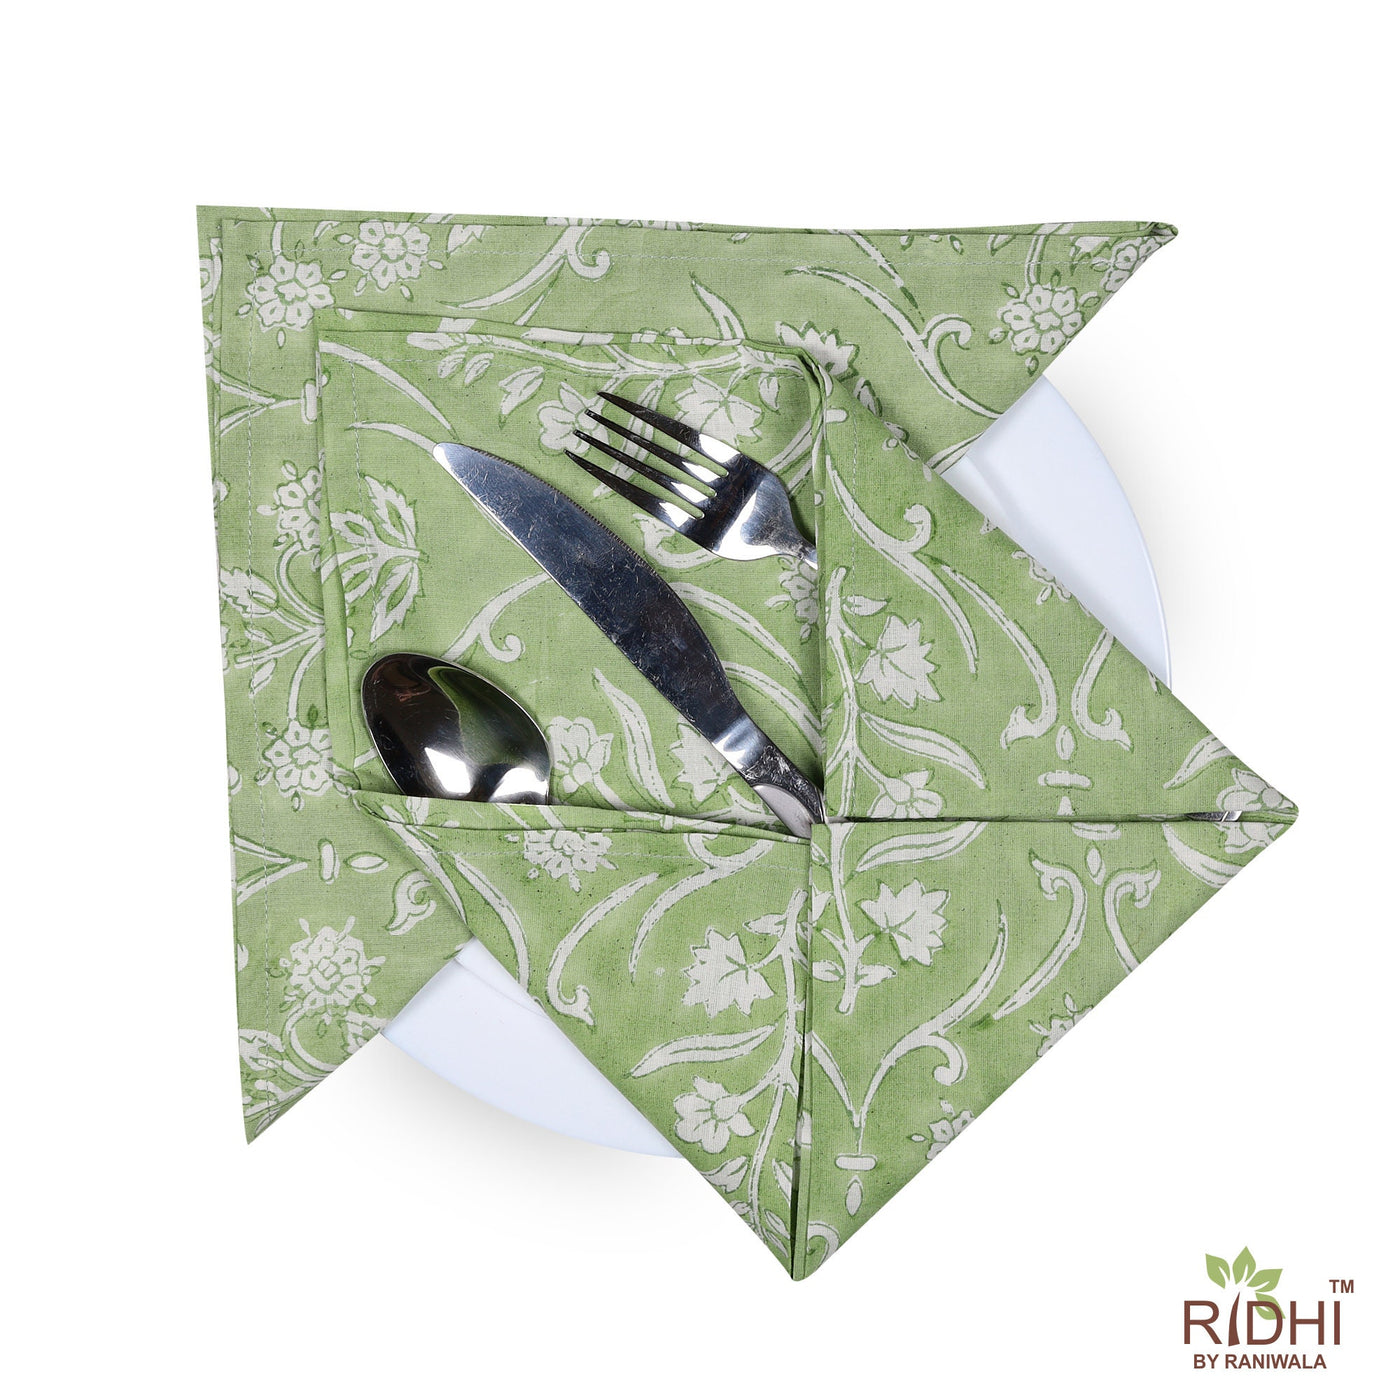 Fabricrush Sage Green and White Indian Floral Hand Block Floral Printed Pure Cotton Cloth Napkins, 18x18"- Cocktail Napkins, 20x20"- Dinner Napkins